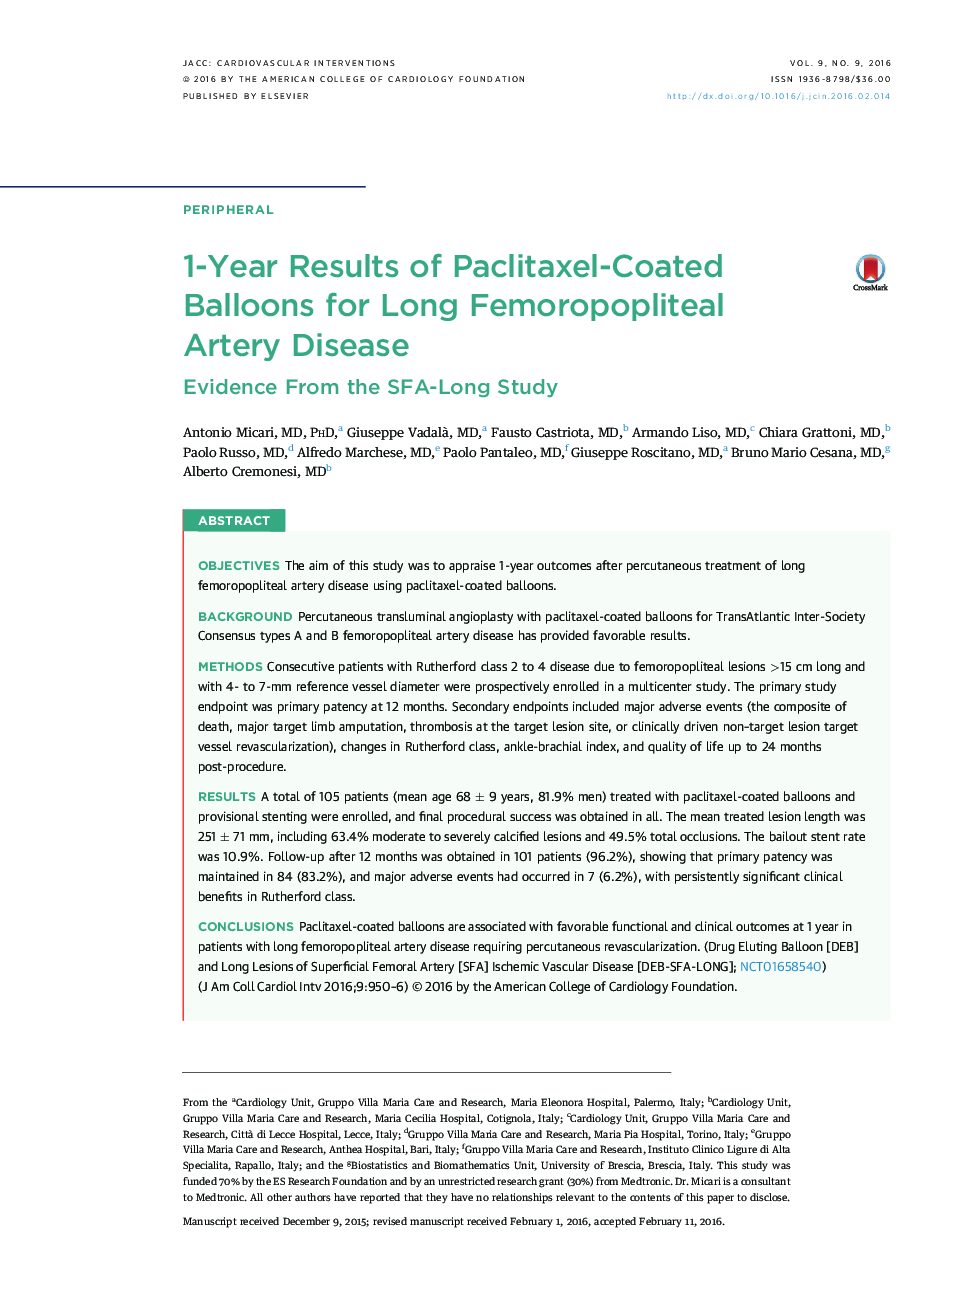 1-Year Results of Paclitaxel-Coated Balloons for Long Femoropopliteal Artery Disease : Evidence From the SFA-Long Study